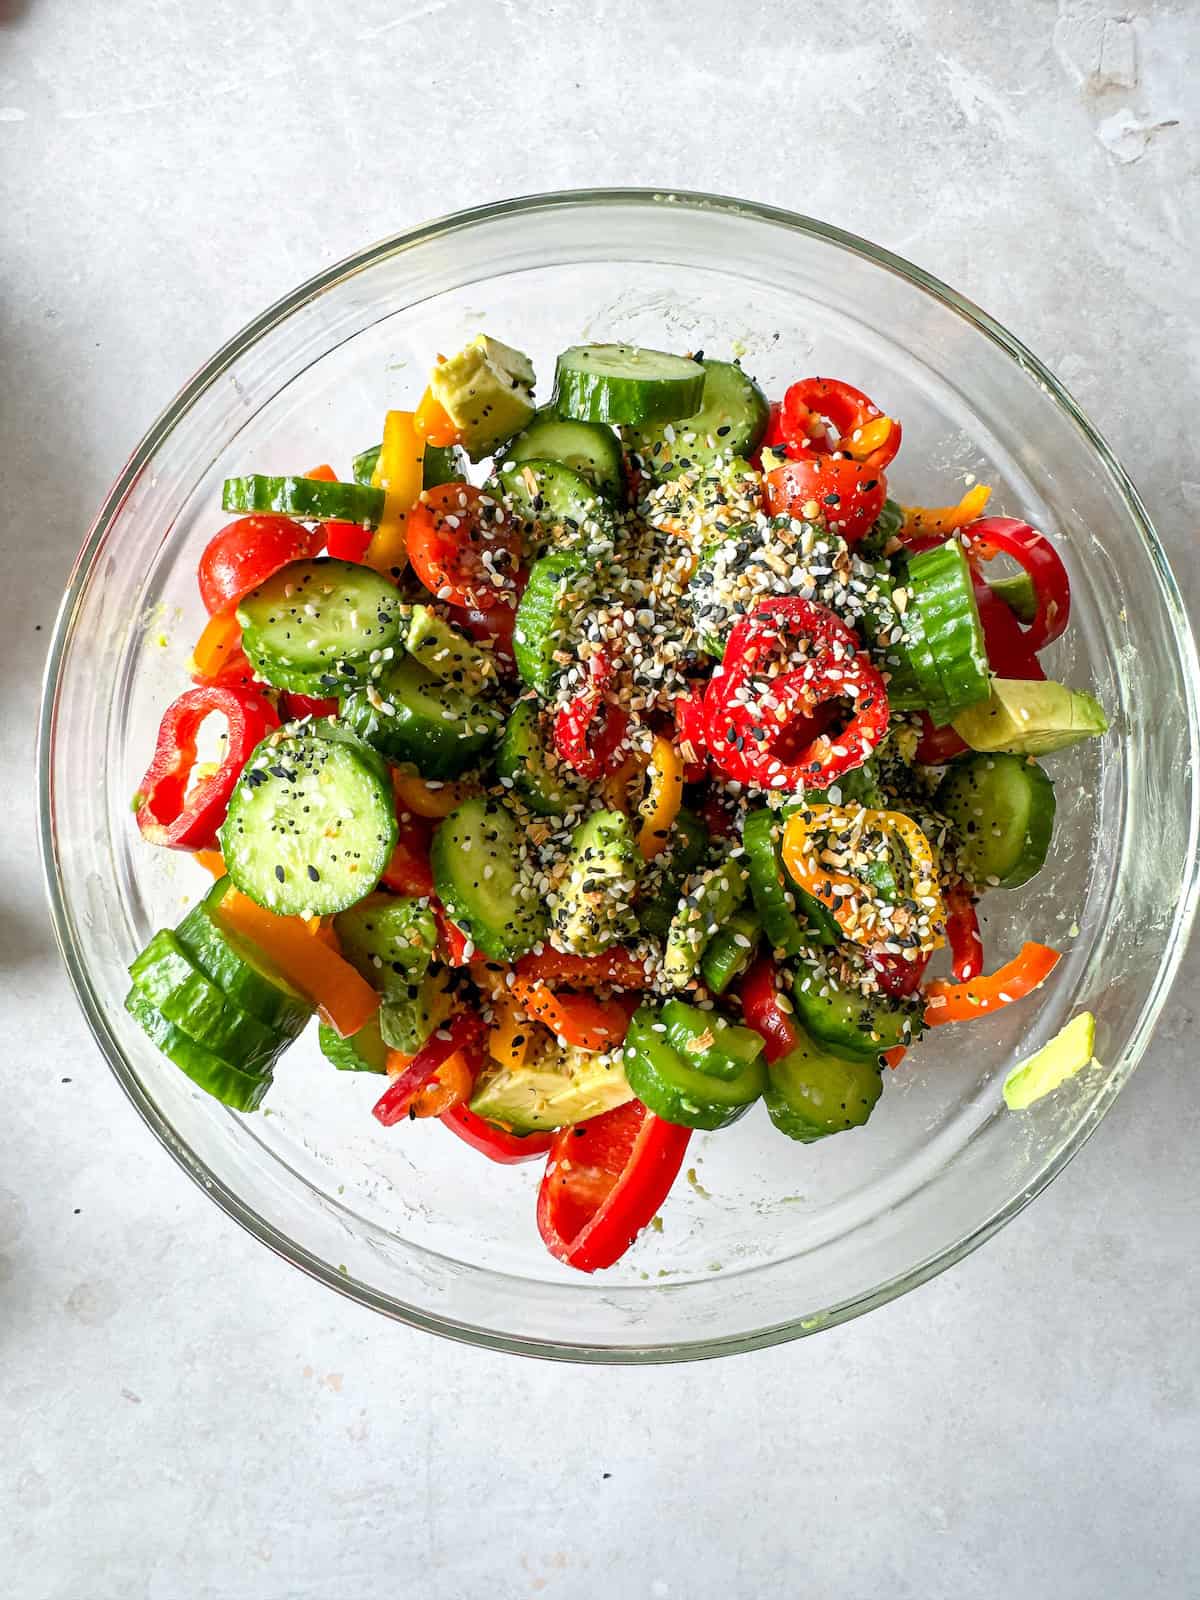 Cucumber slices, red peppers, and everything bagel seasoning in a bowl. 